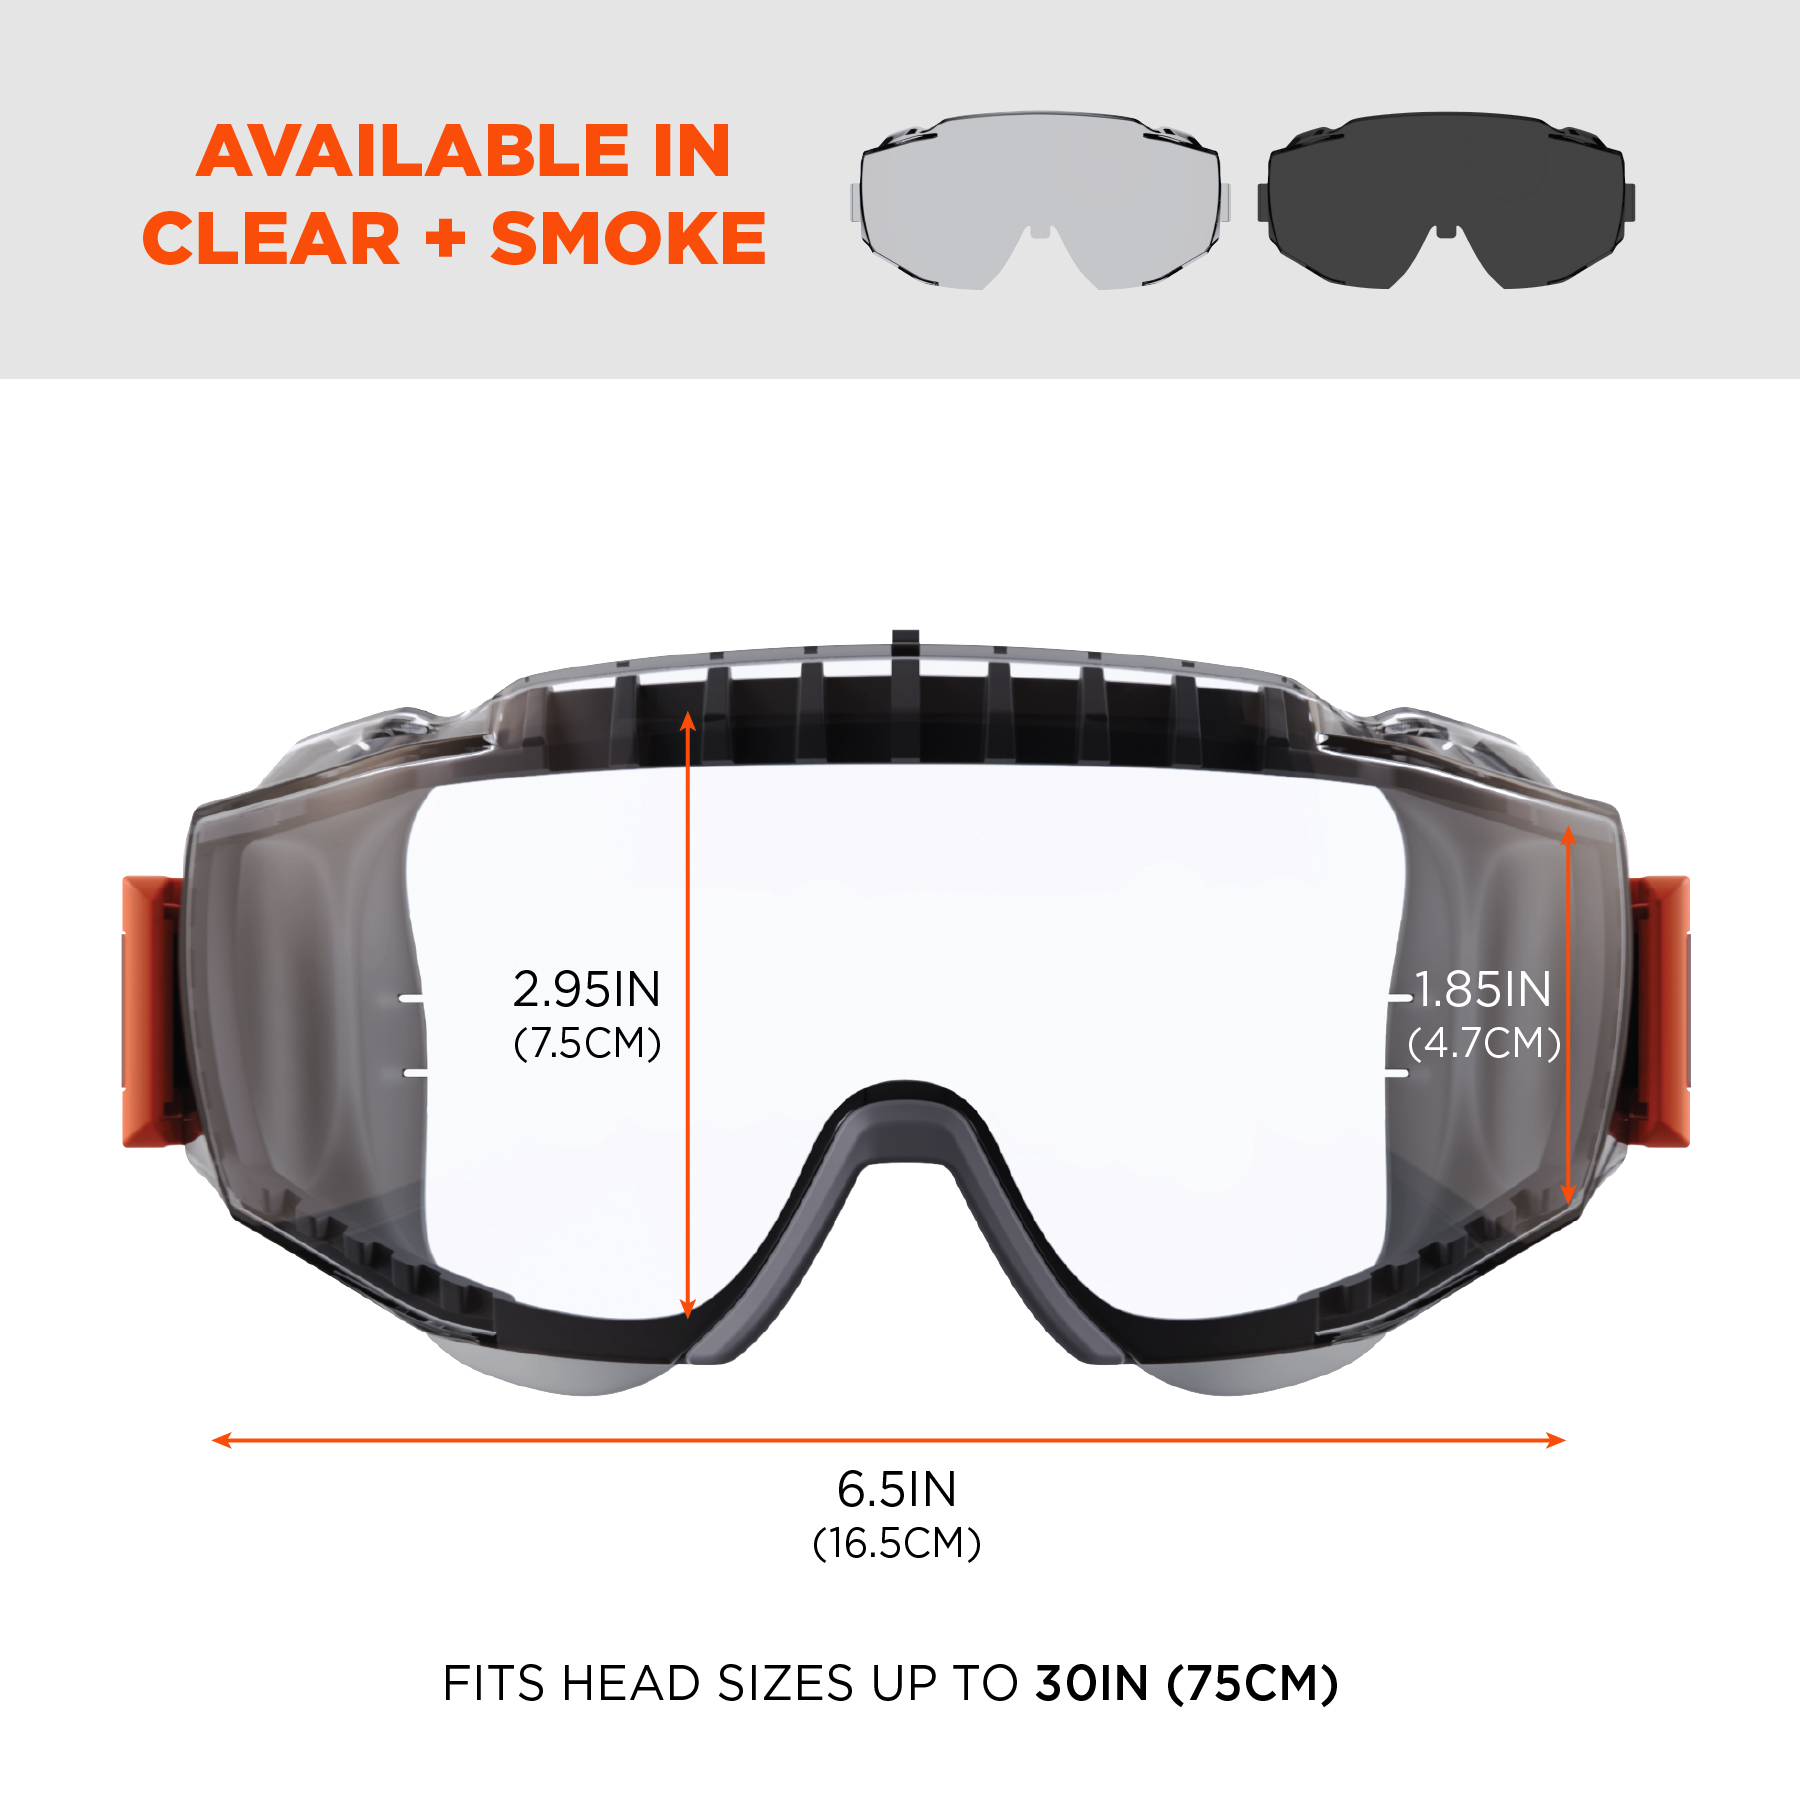 https://www.ergodyne.com/sites/default/files/product-images/60302-modi-otg-safety-goggles-neoprene-clear-available-in-clear-smoke_0.jpg